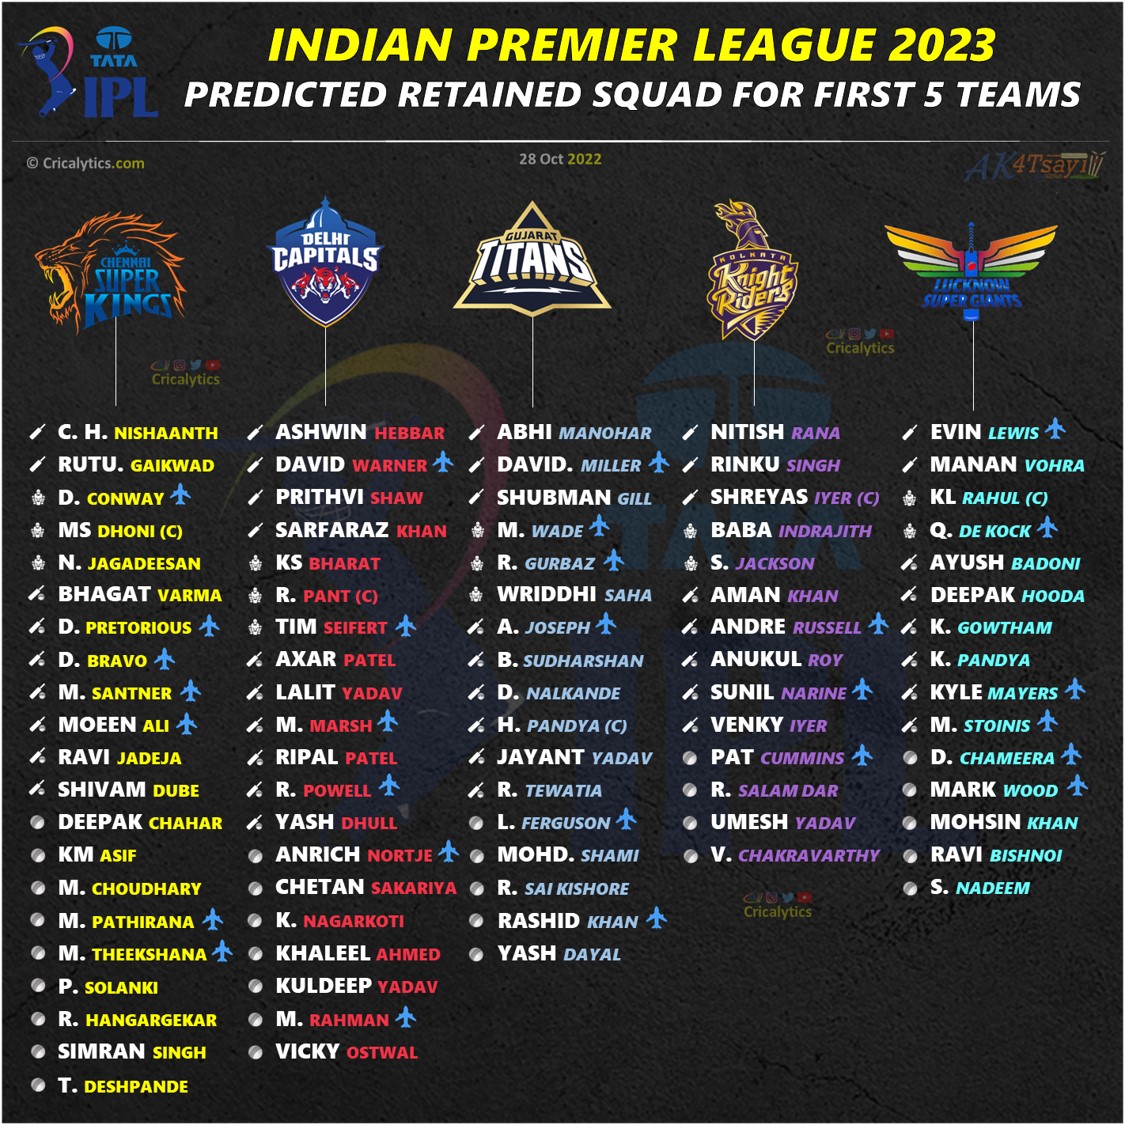 IPL 2023: Confirmed Retained Squad and Players List for all 10 Teams » sakinews